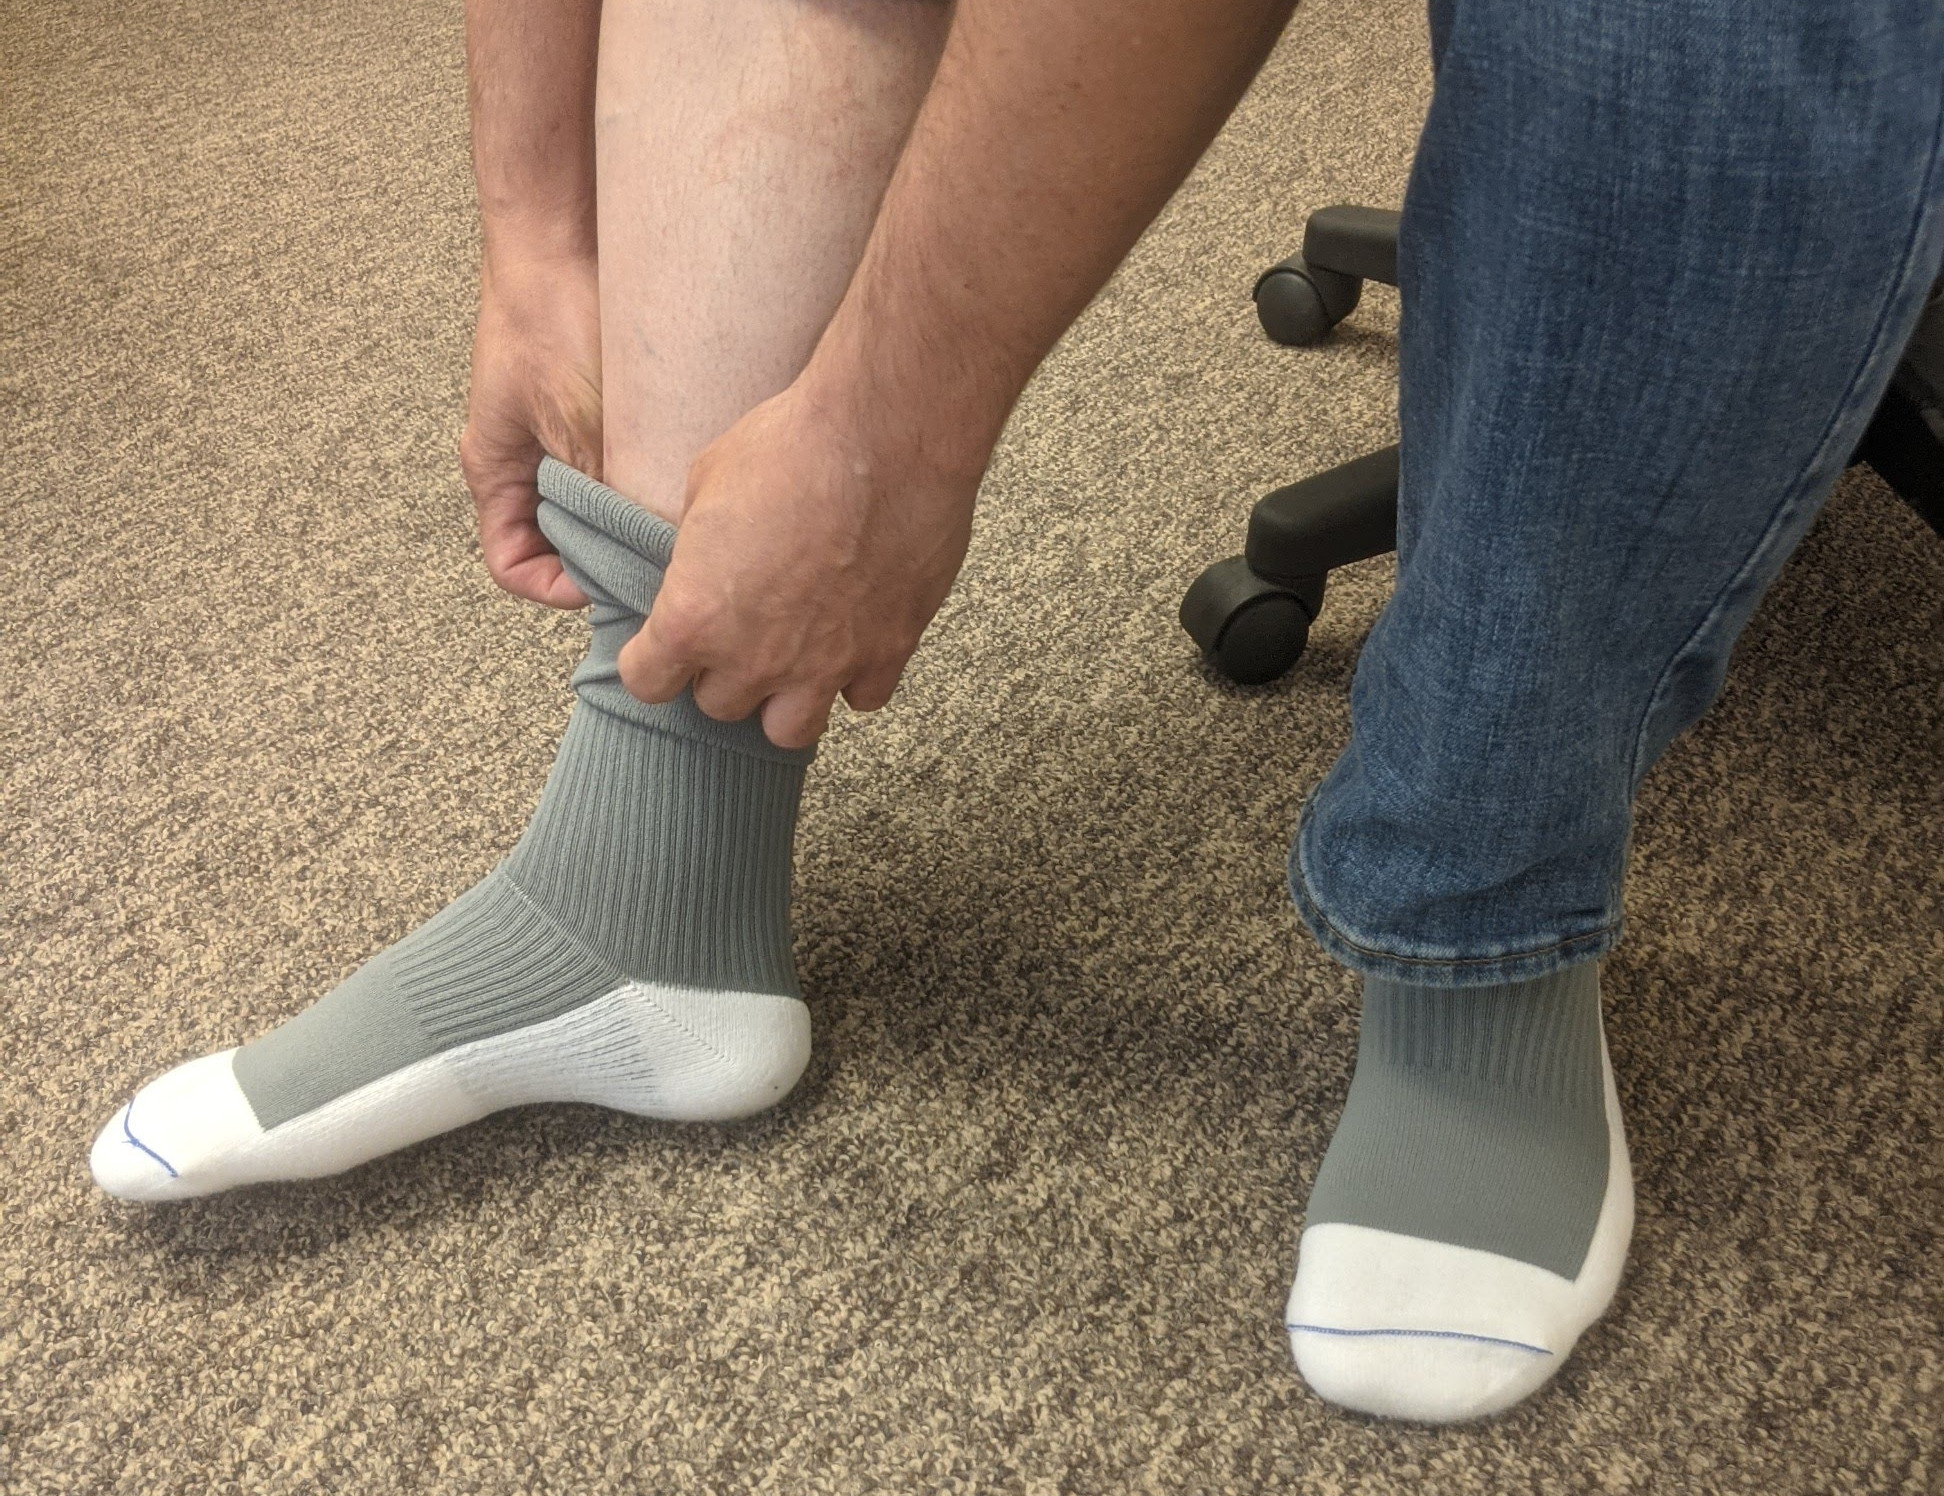 What Do You Wear Ankle Socks With?